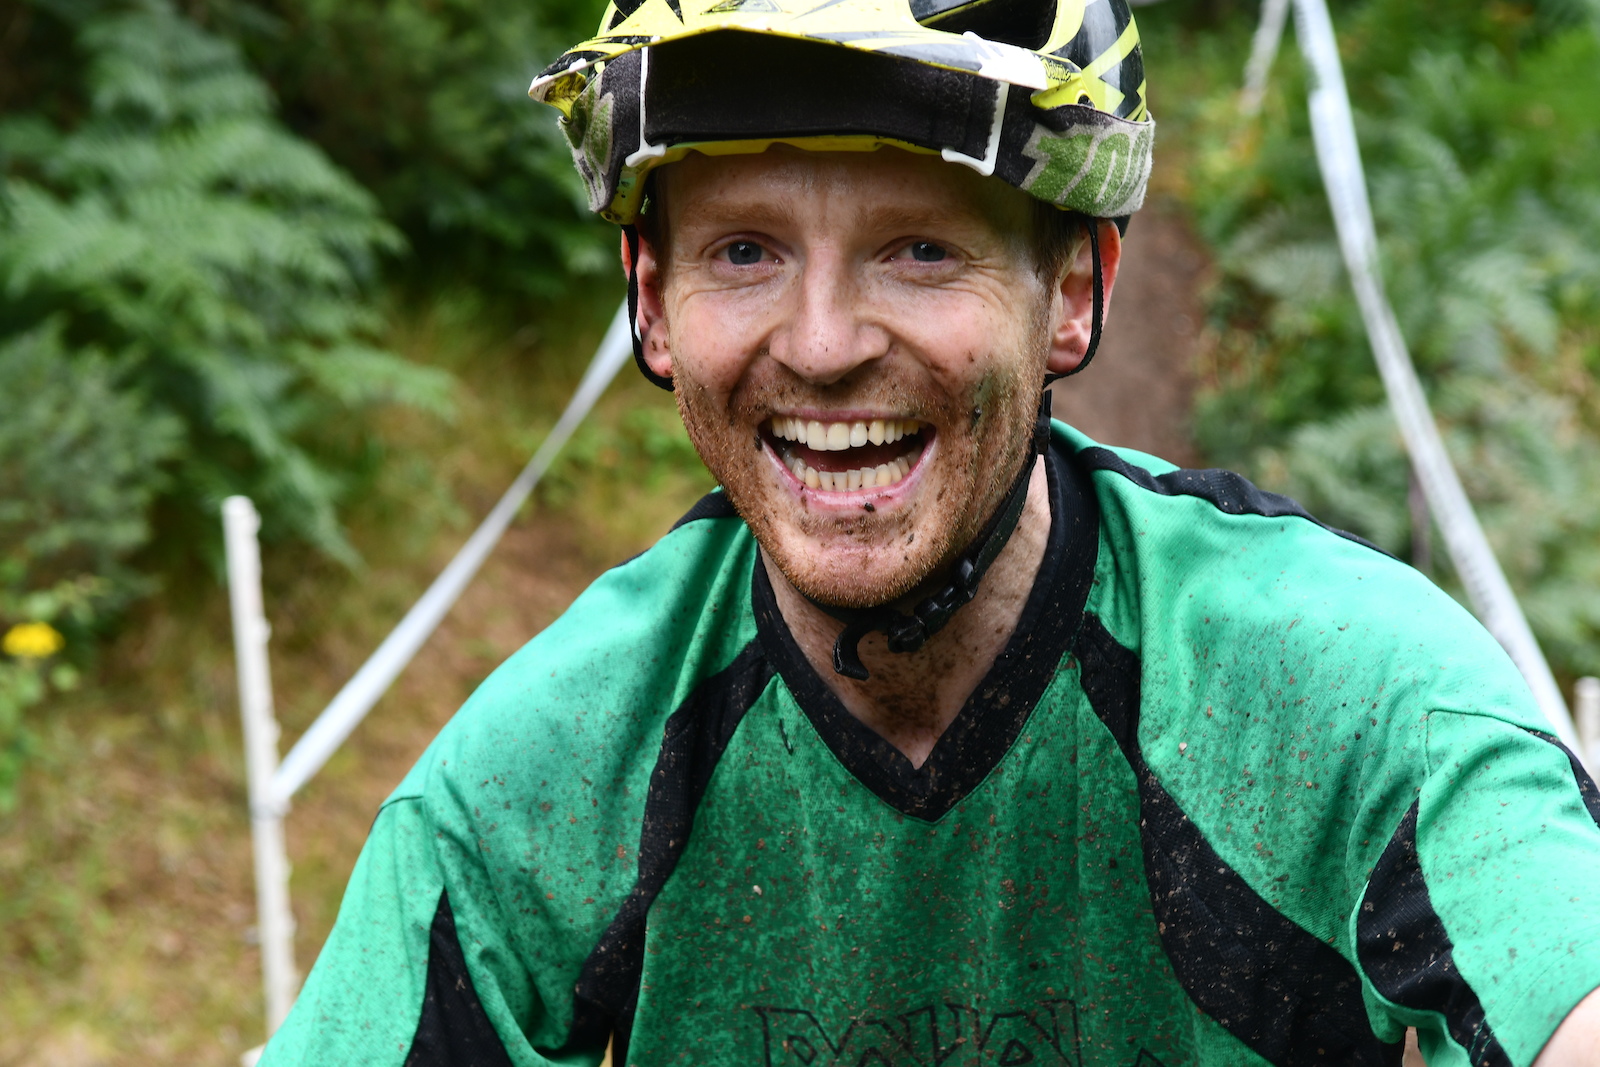 Nothing better than a big smile after a good muddy trail